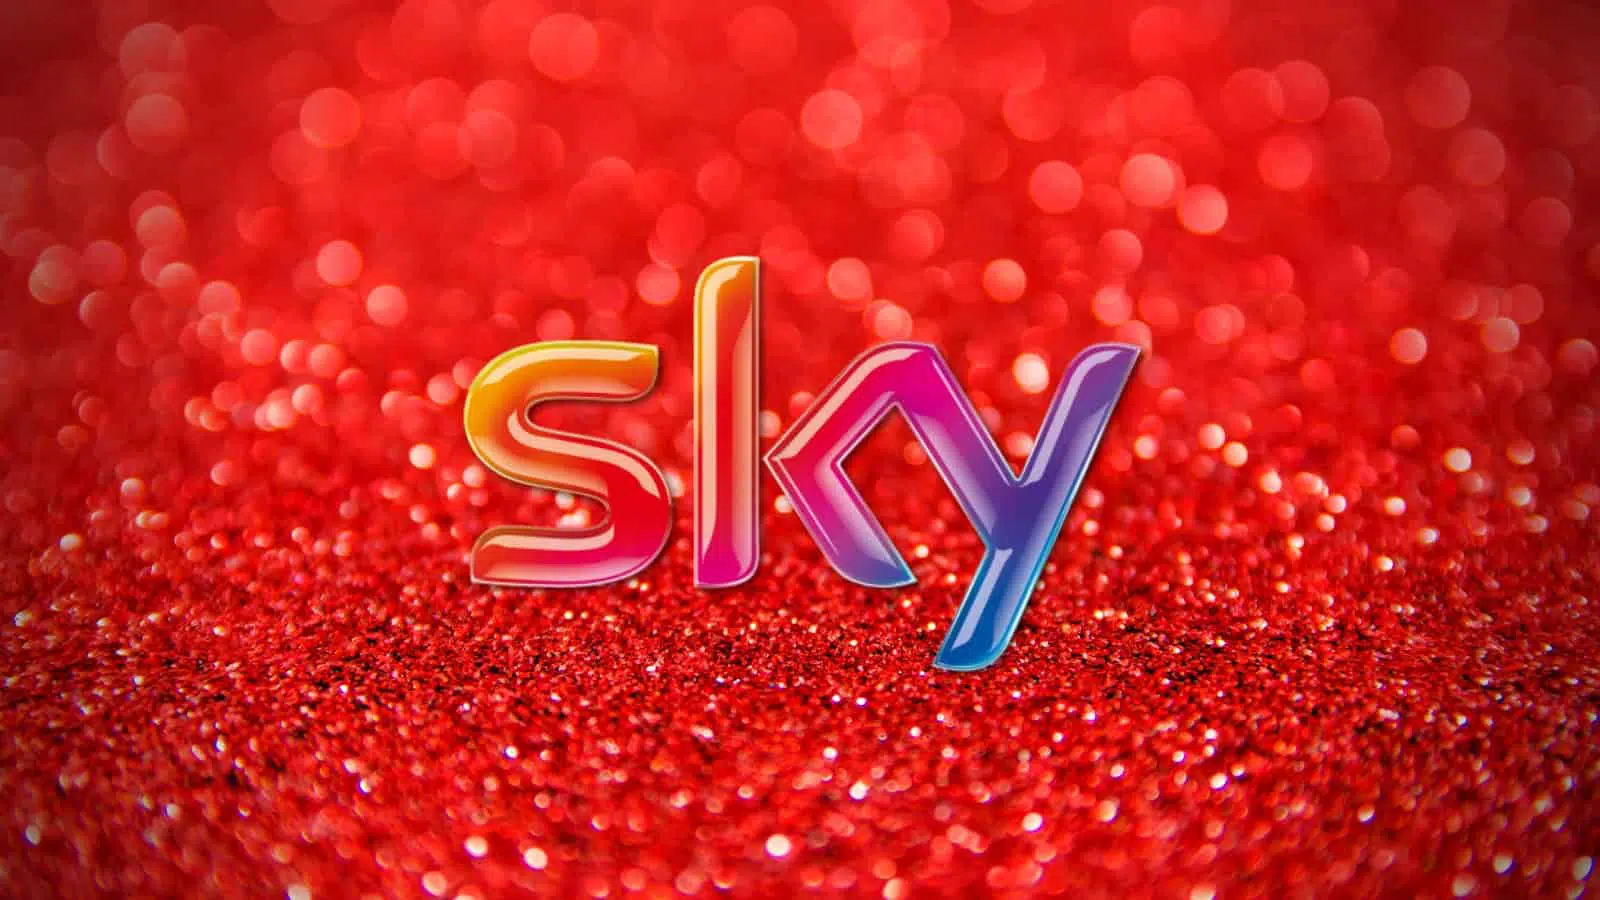 Globe Soccer Awards 2021, Sky will be the media partner for the 12th edition